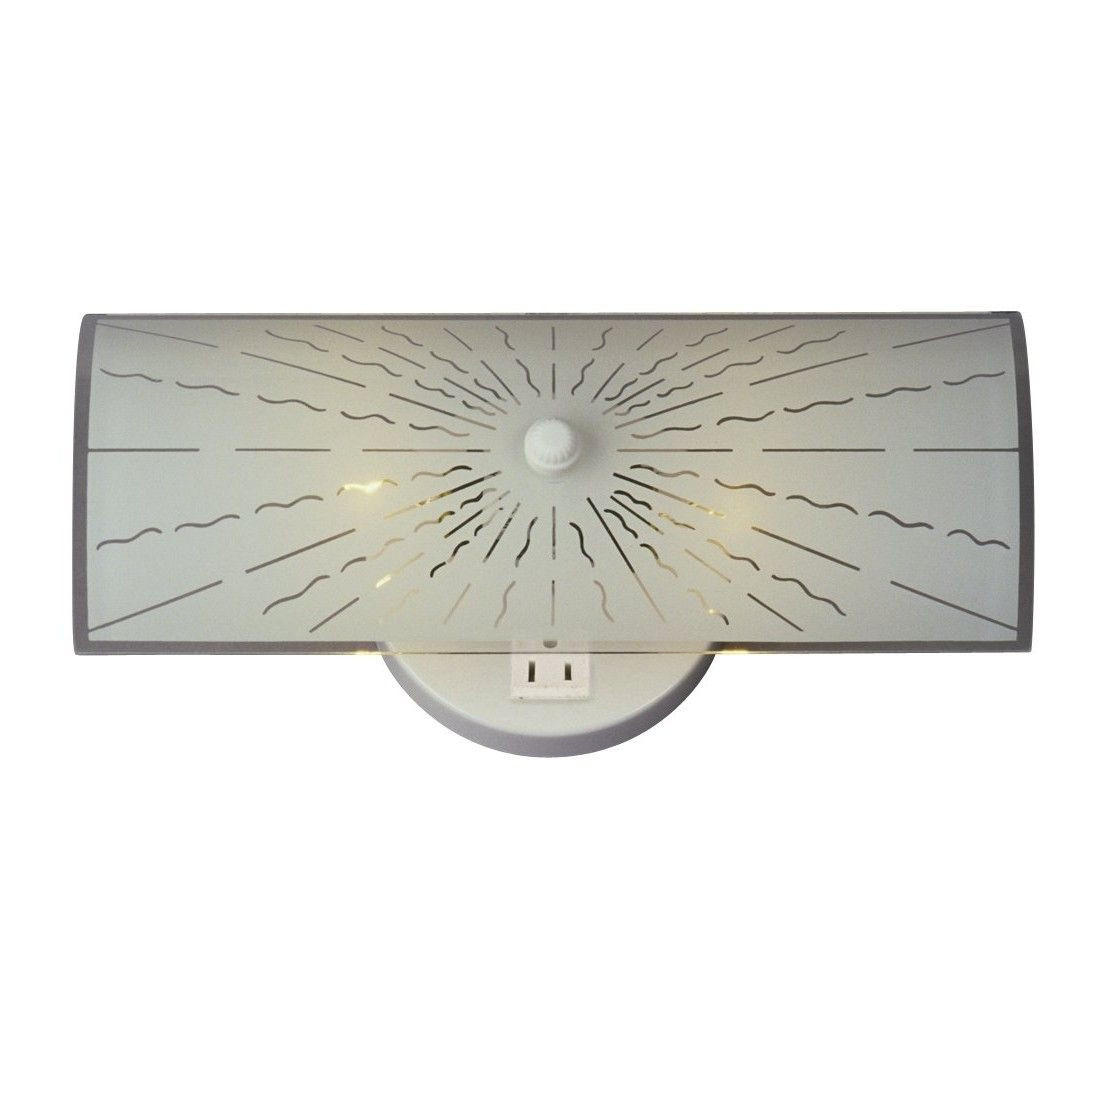 Bathroom Light With Outlet
 bathroom light fixture with electrical outlet attached